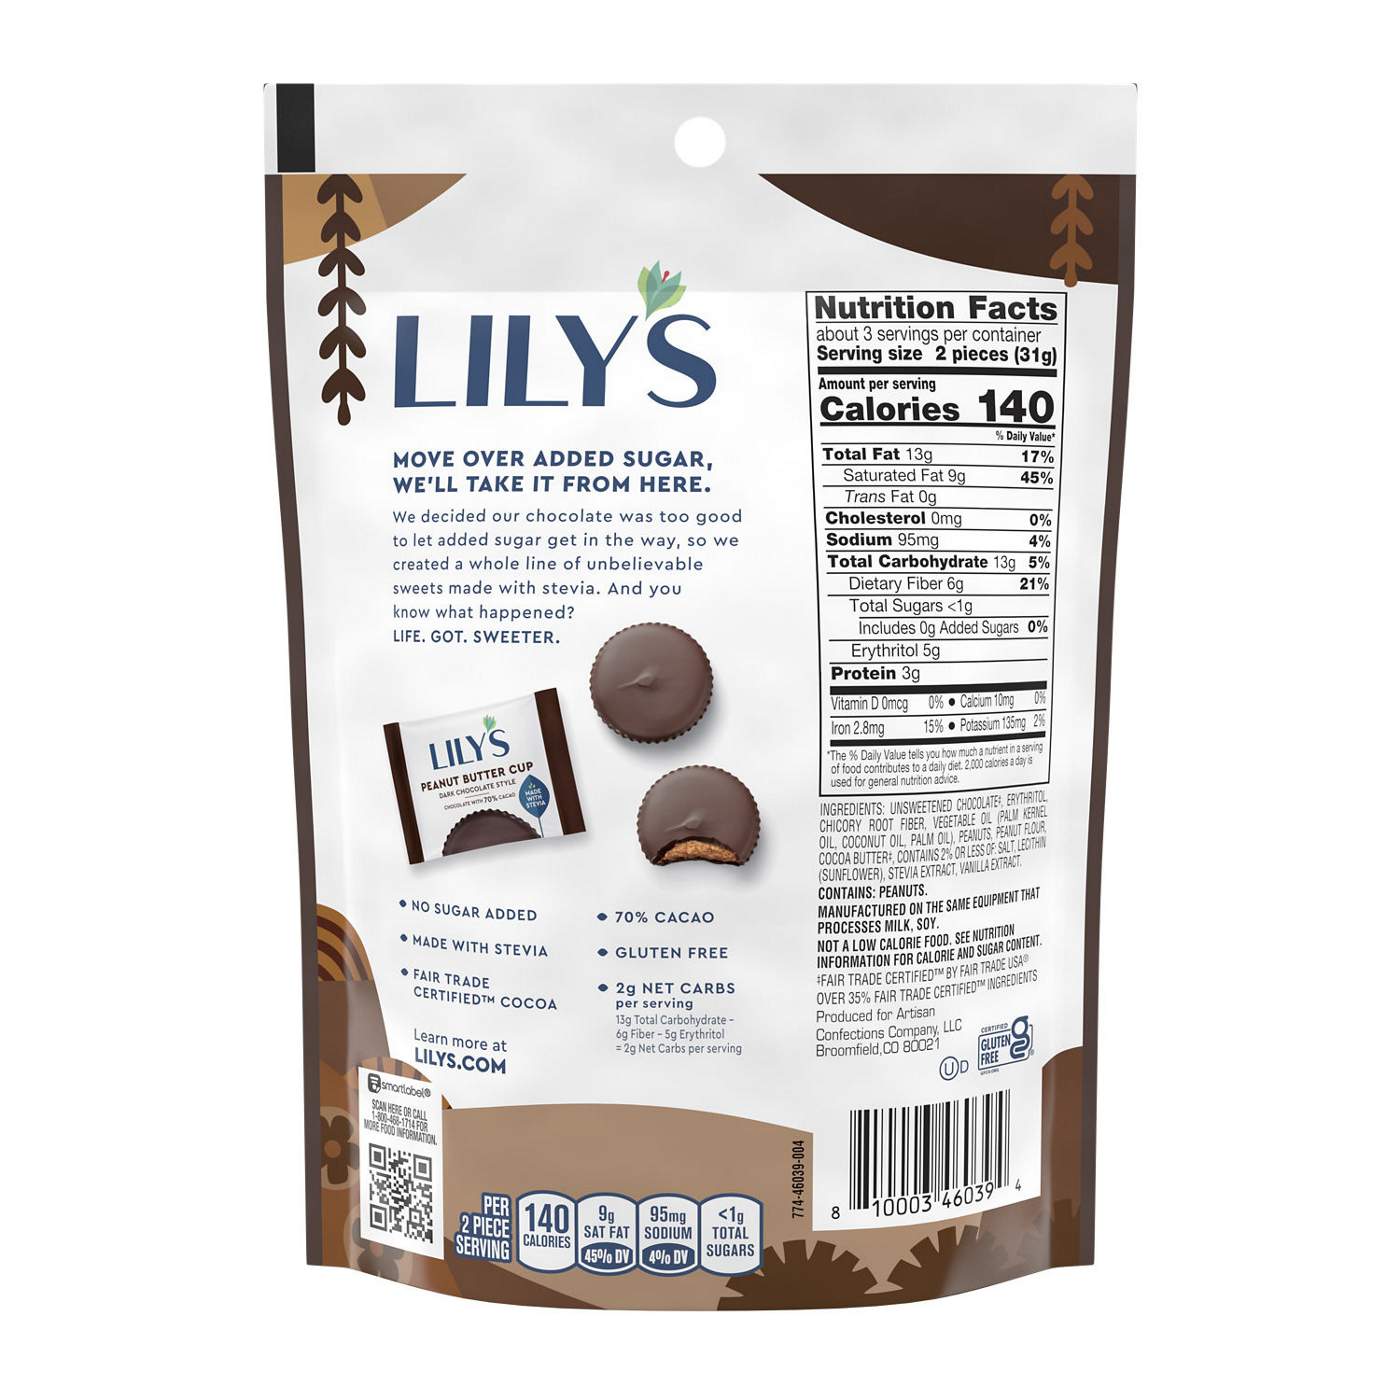 Lily's Dark Chocolate Style Peanut Butter Cups; image 4 of 6